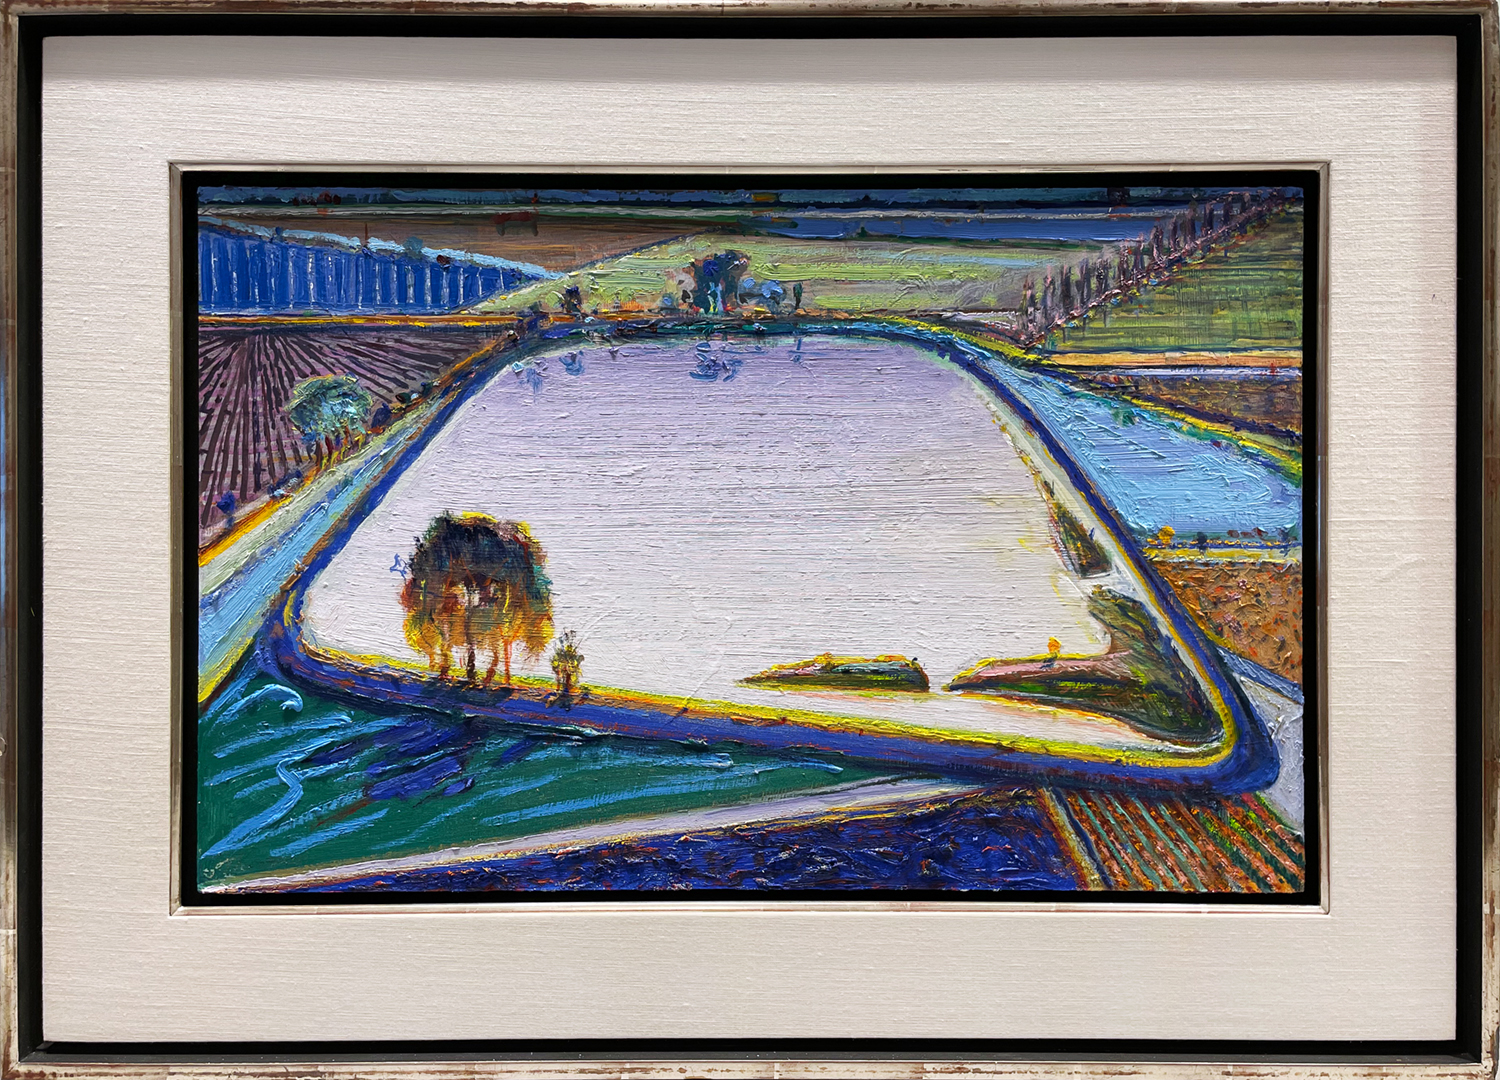 Wayne Thiebaud colorful painting on canvas of irrigation pond with trees